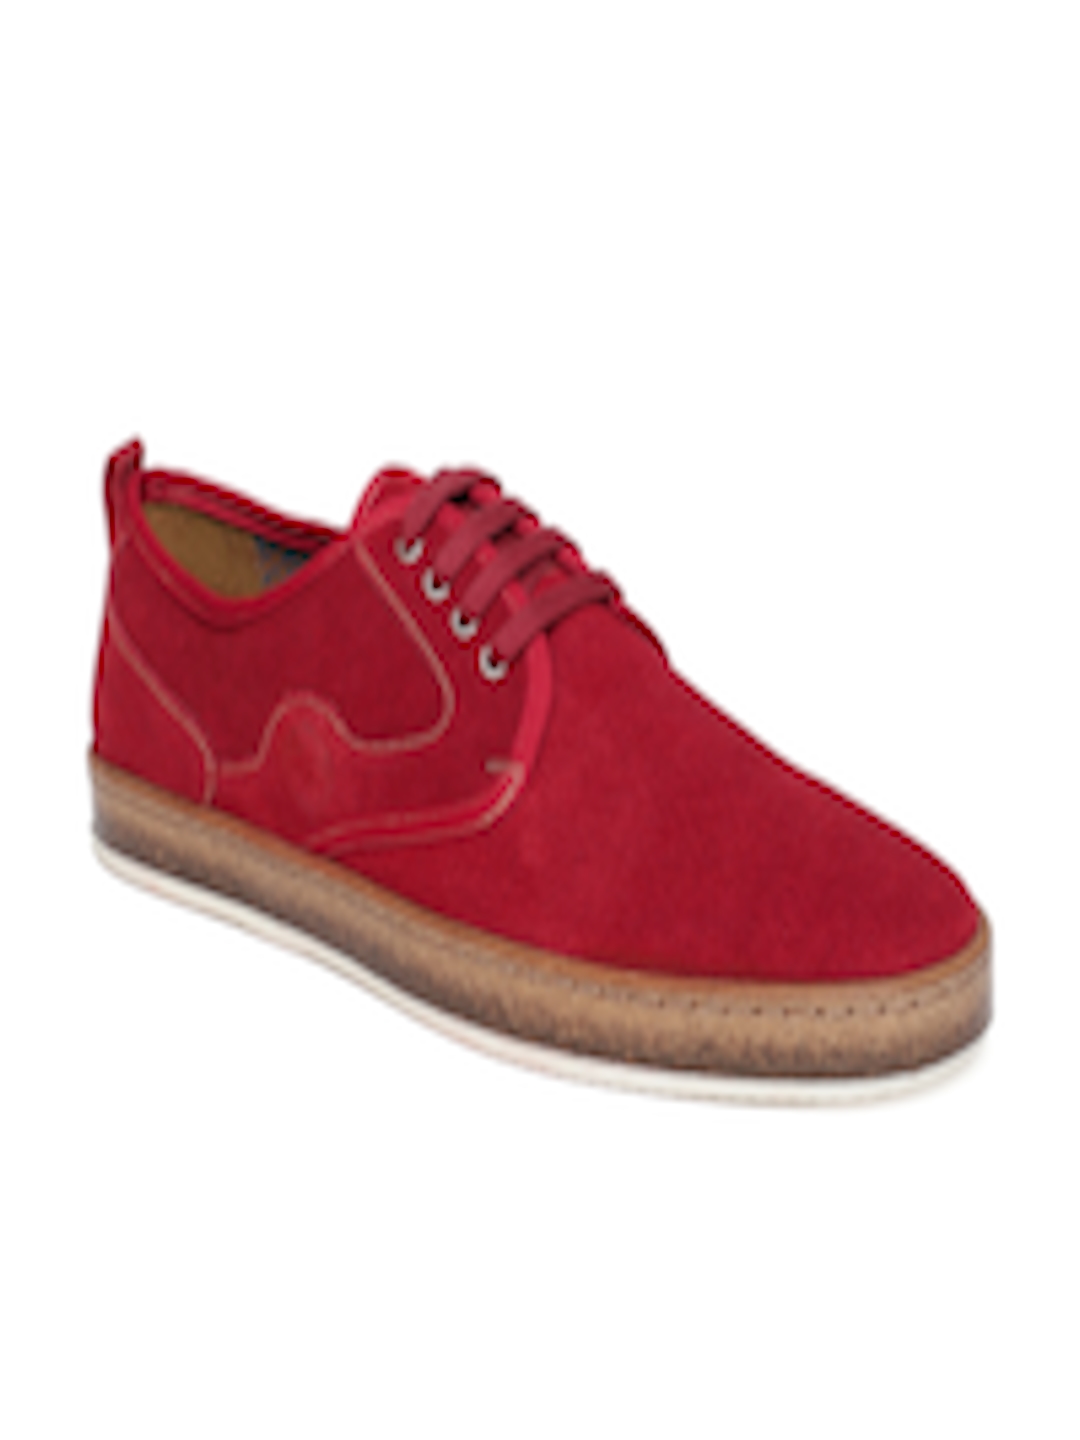 Buy Ruosh Men Red Suede Sneakers - Casual Shoes for Men 9012367 | Myntra